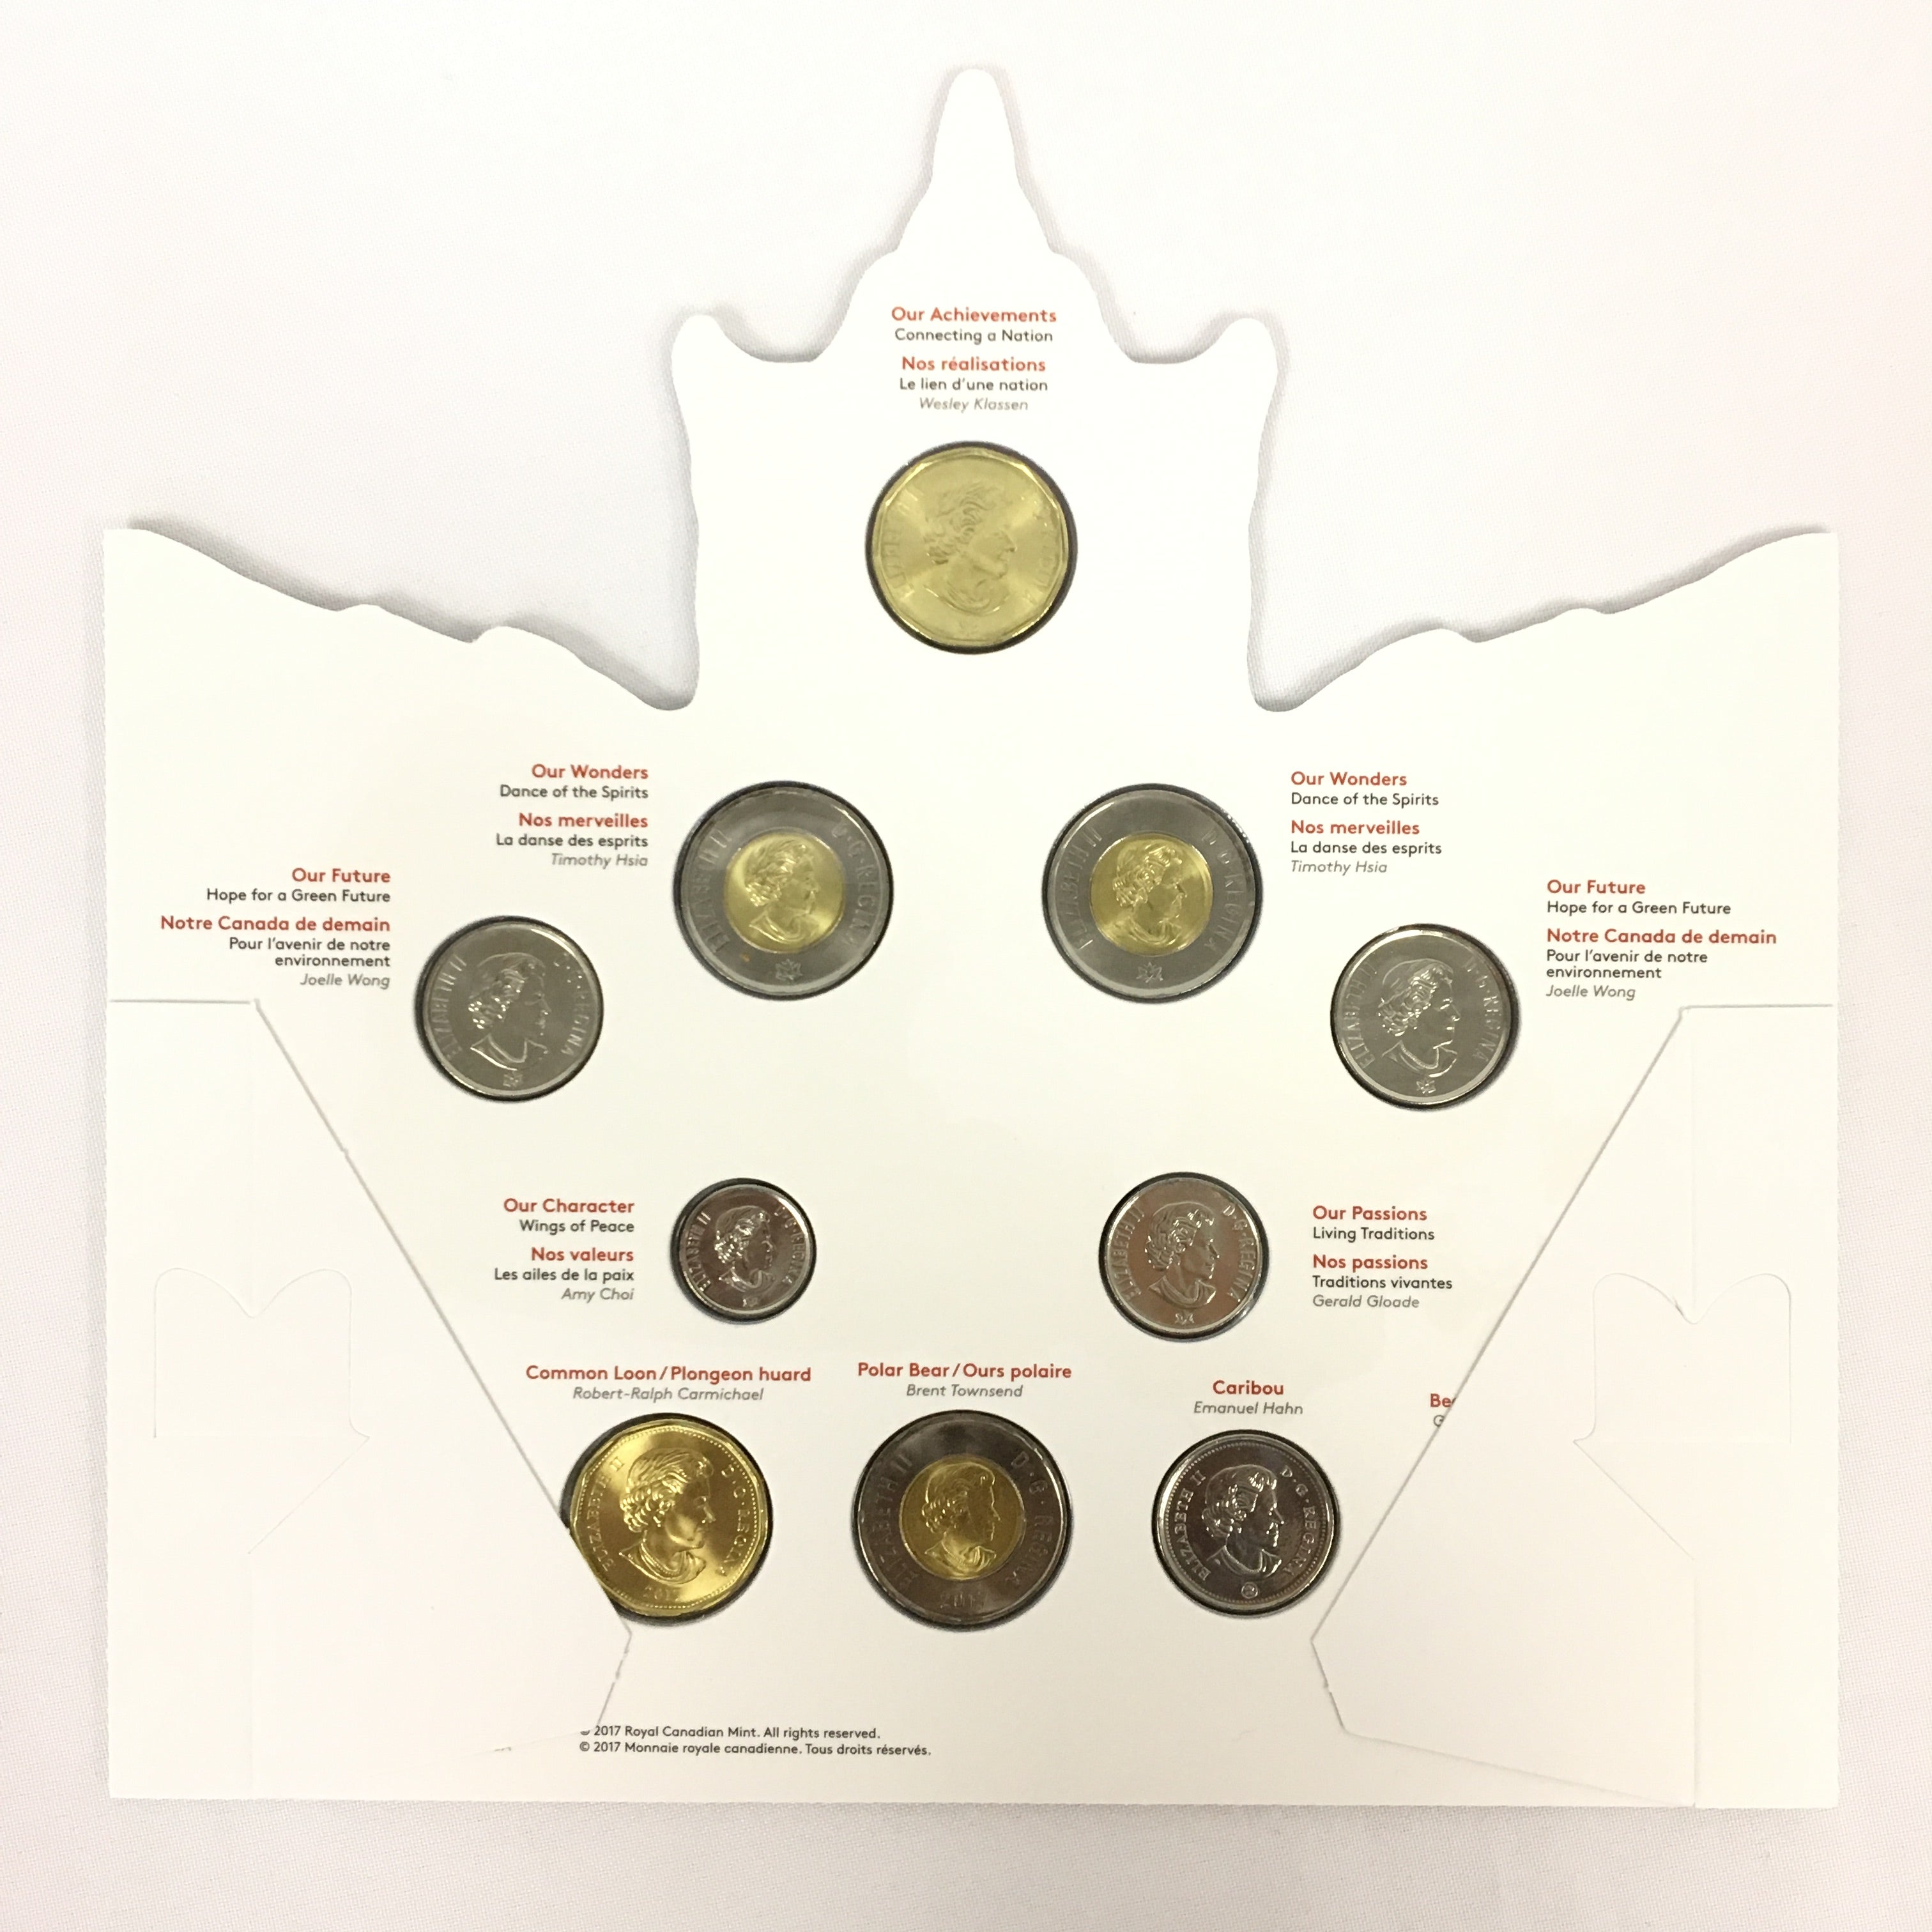 2017 Canada 150 Years Anniversary - 12-Coin Collection